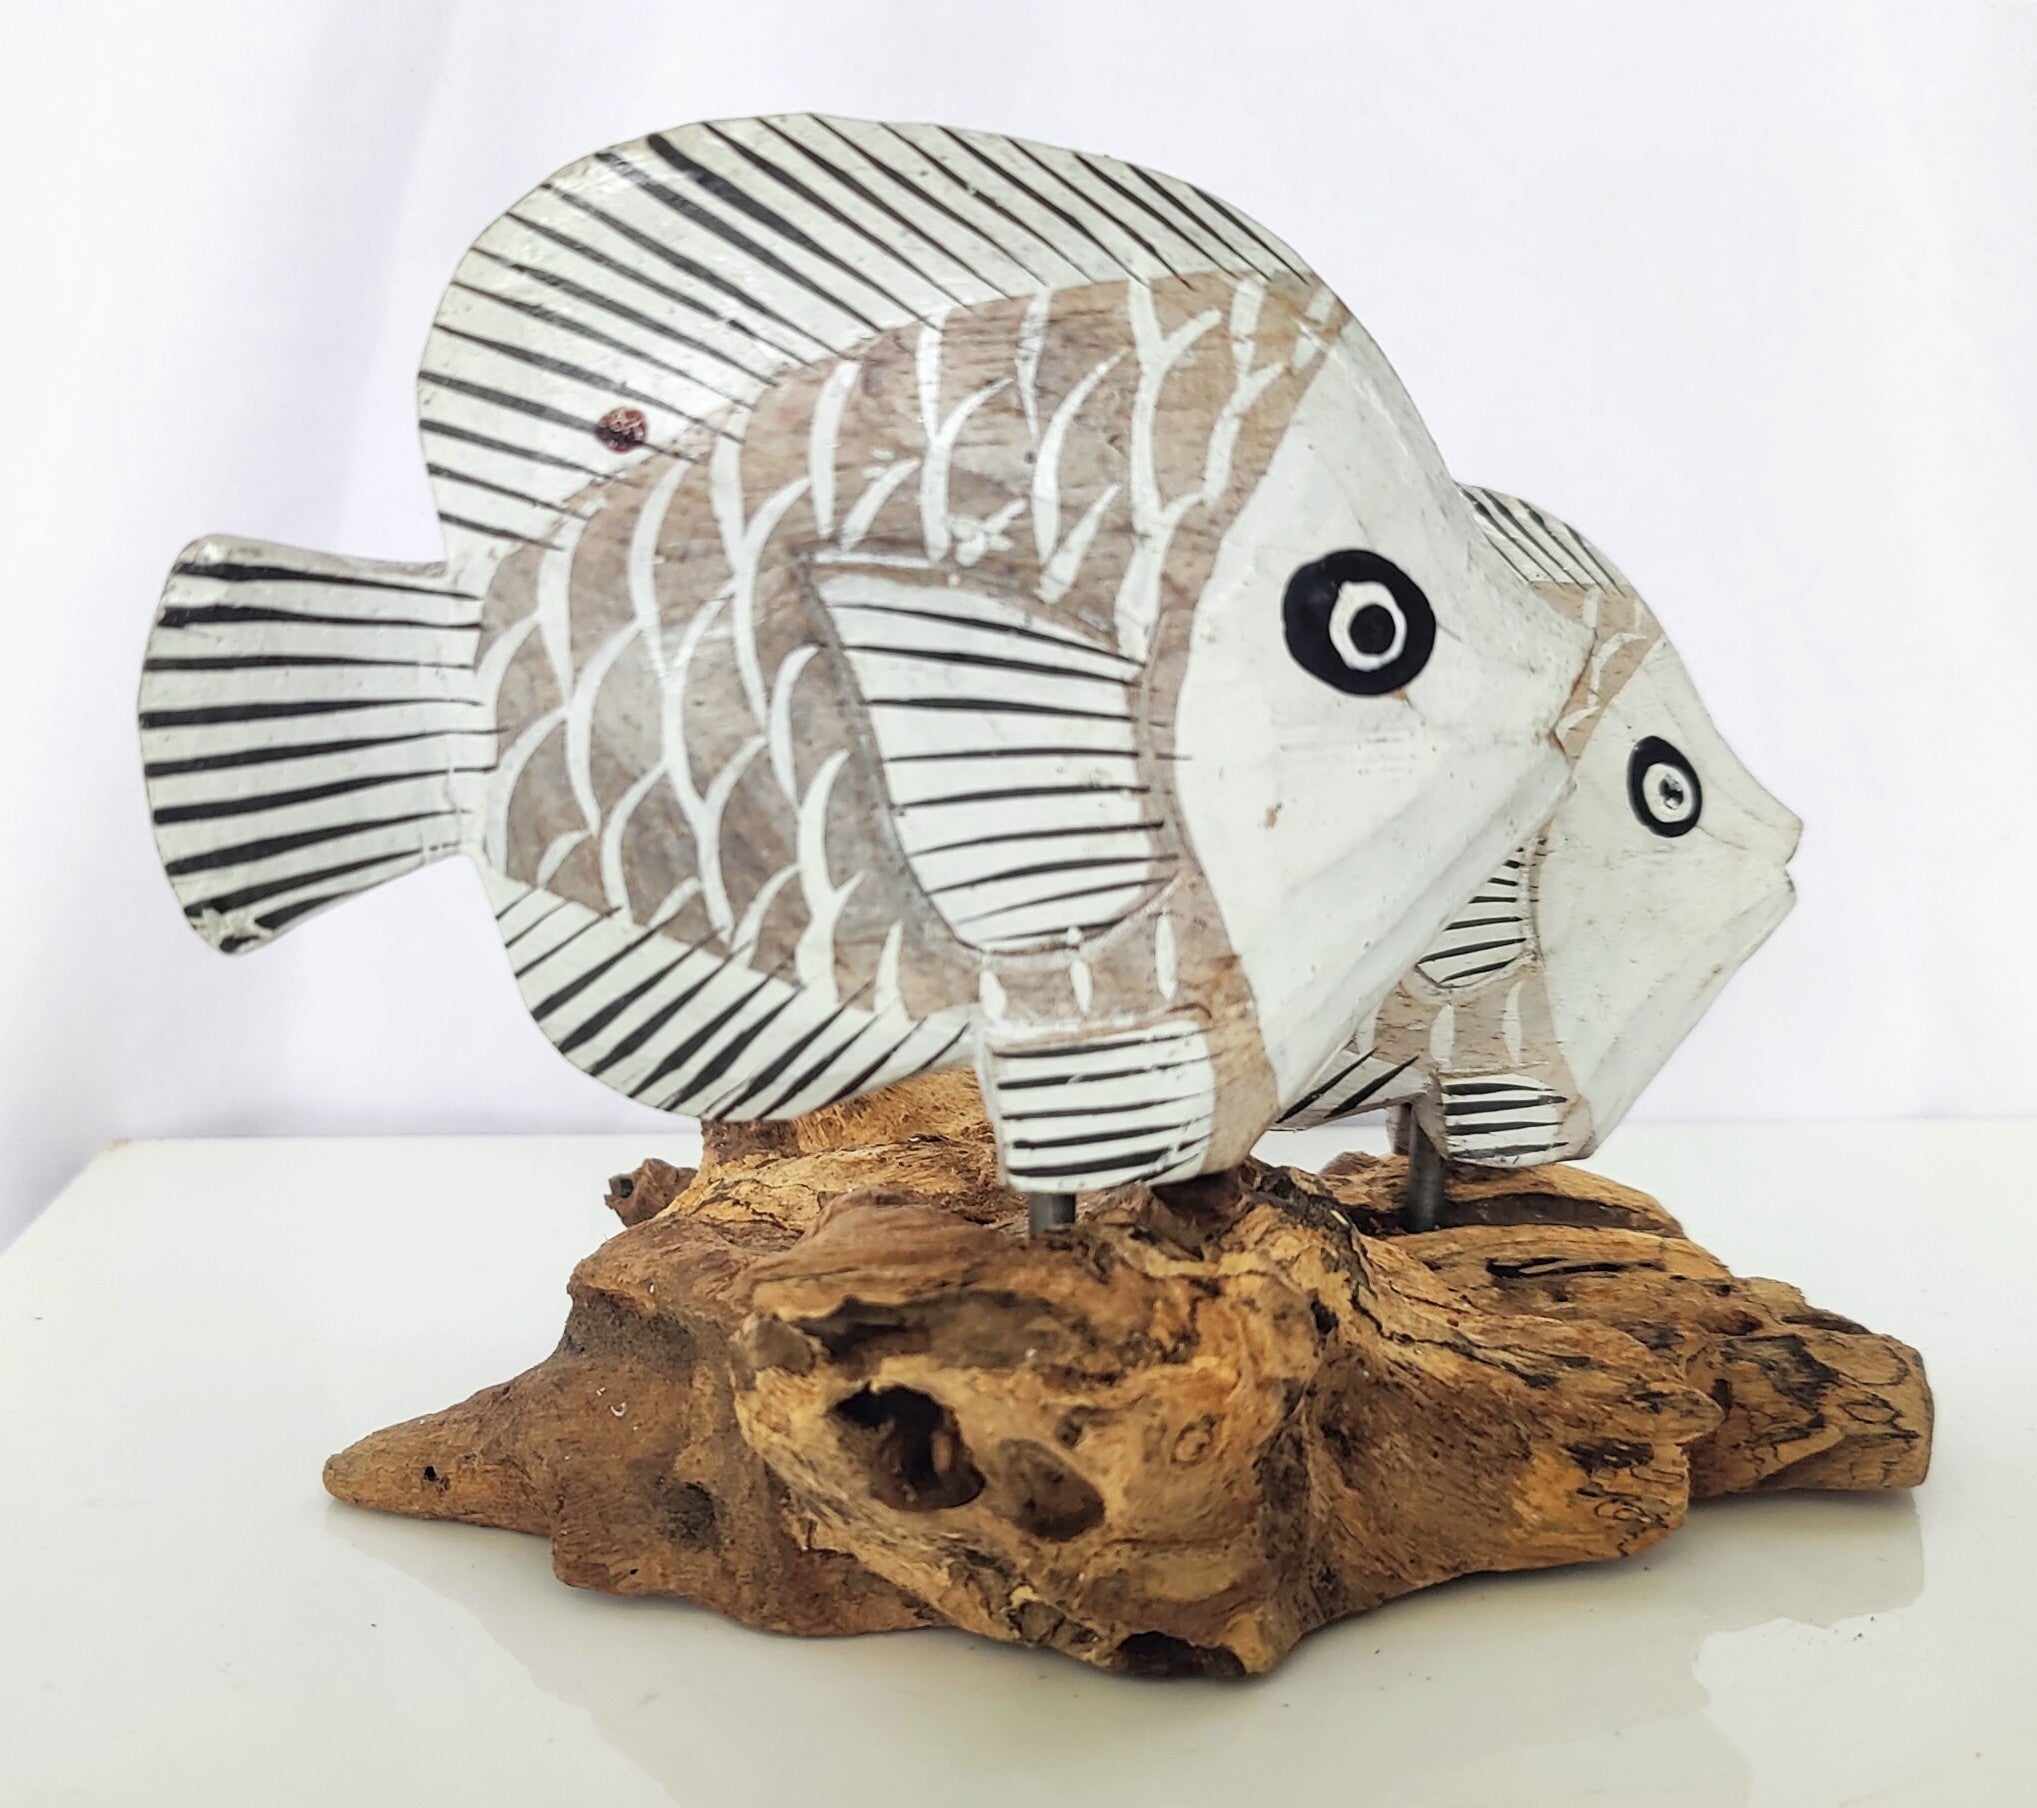 Home Decor. Tabletop Showpiece. Hand Carved Wooden Fish Statuettes